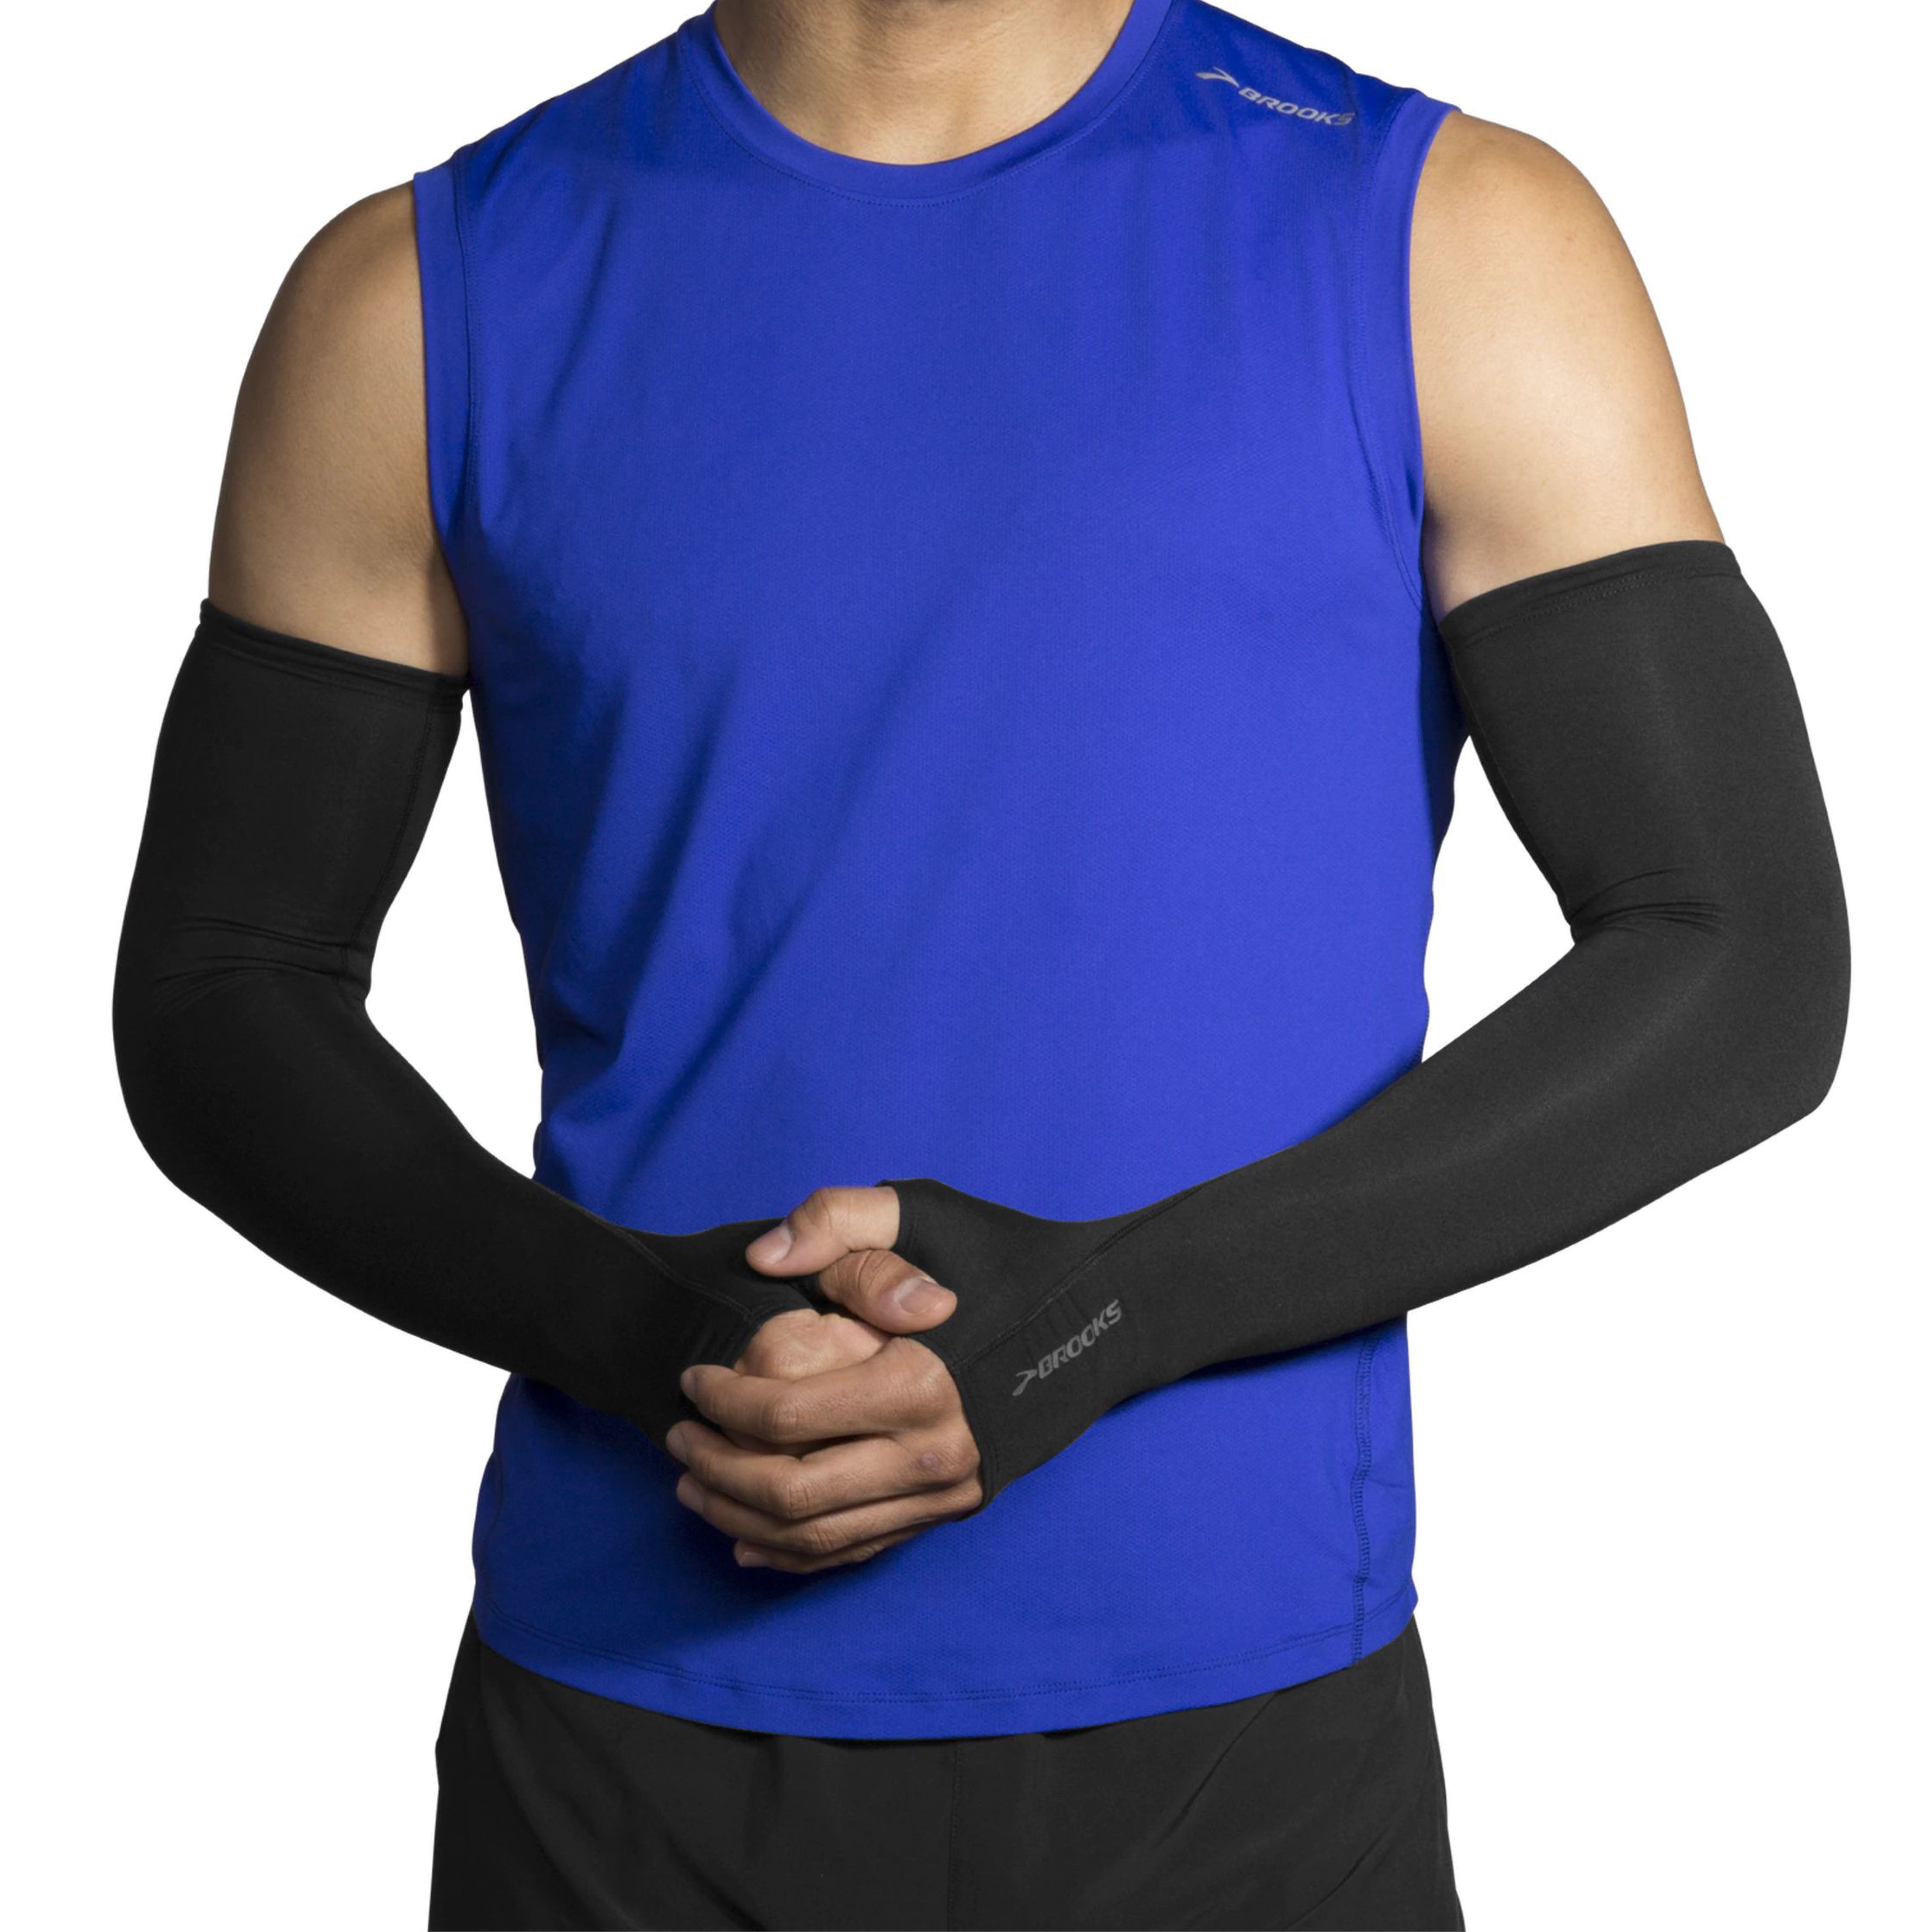 Arm Sleeves for Running